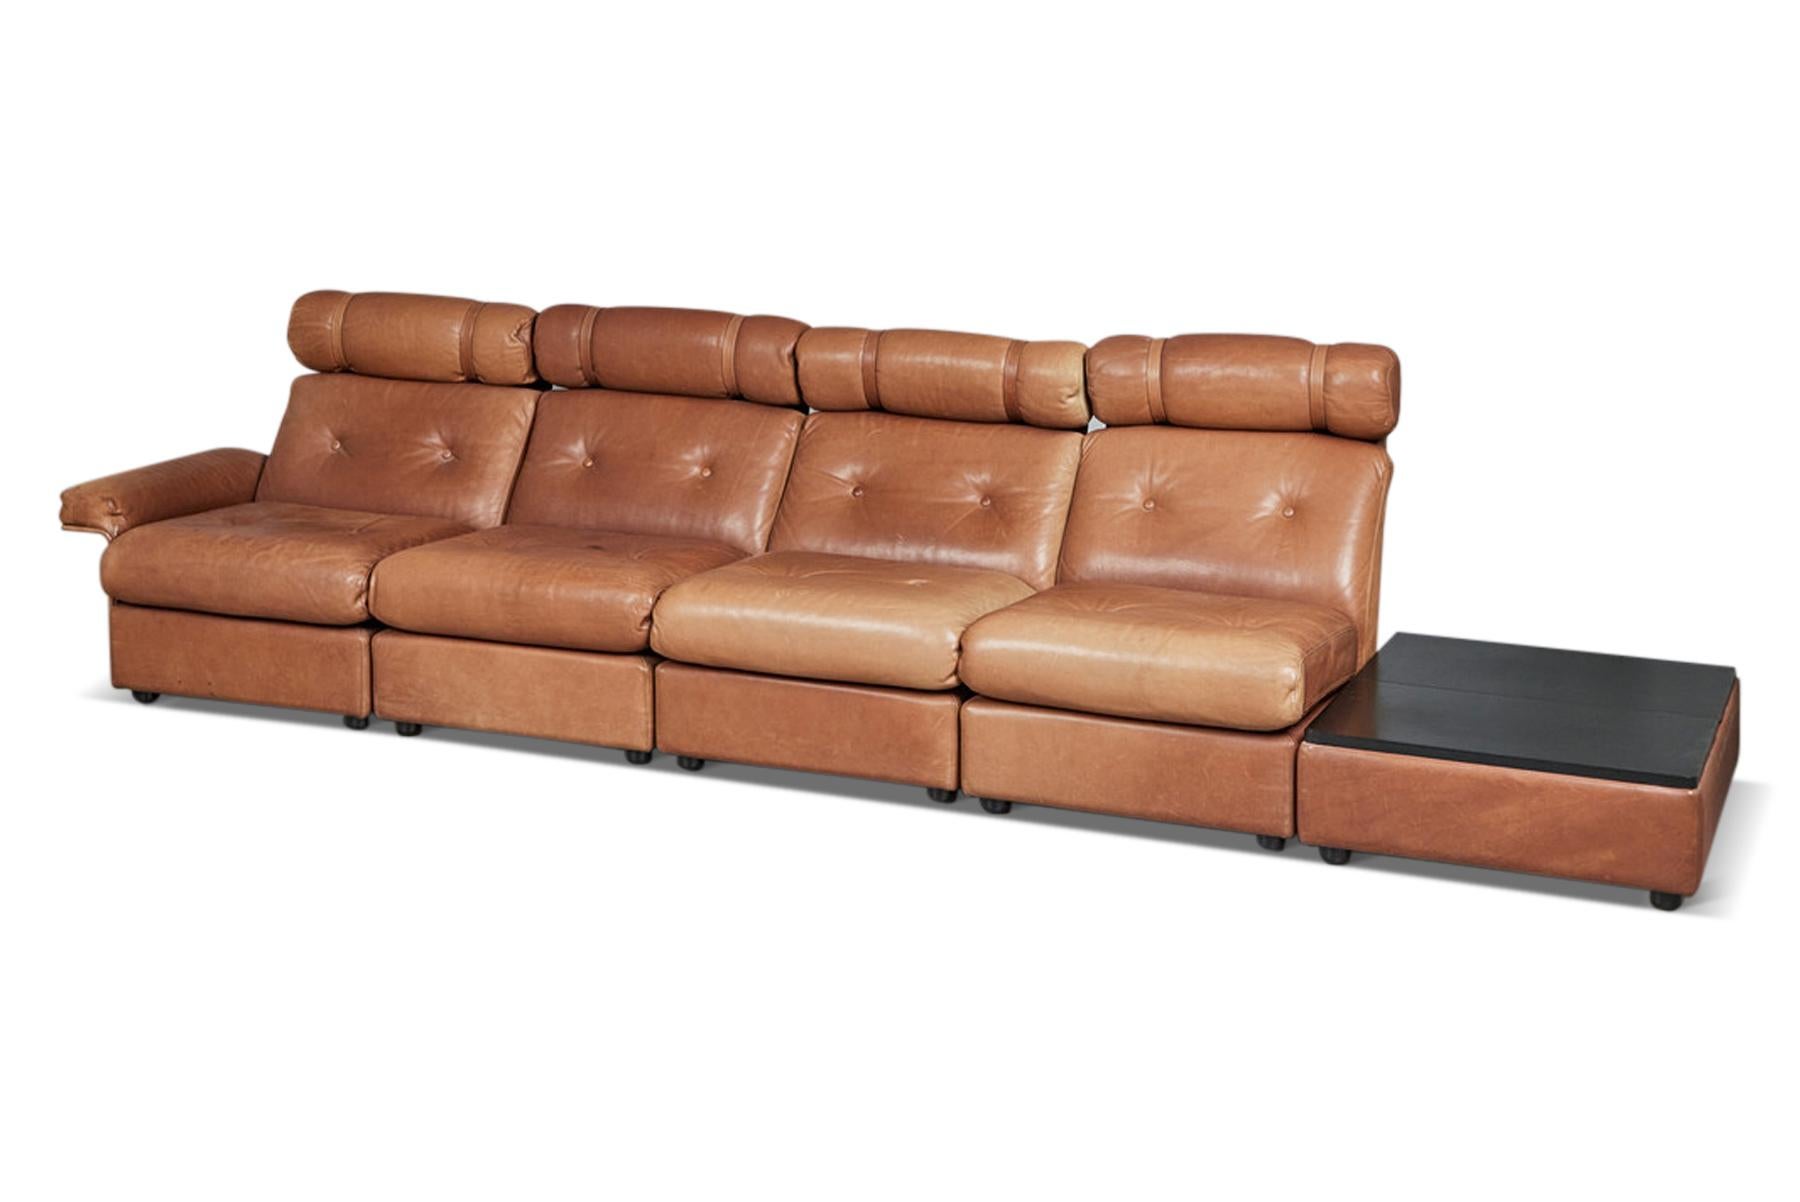 1970s Highback Leather Sectional Sofa in Cognac Buffalo Leather For Sale 5